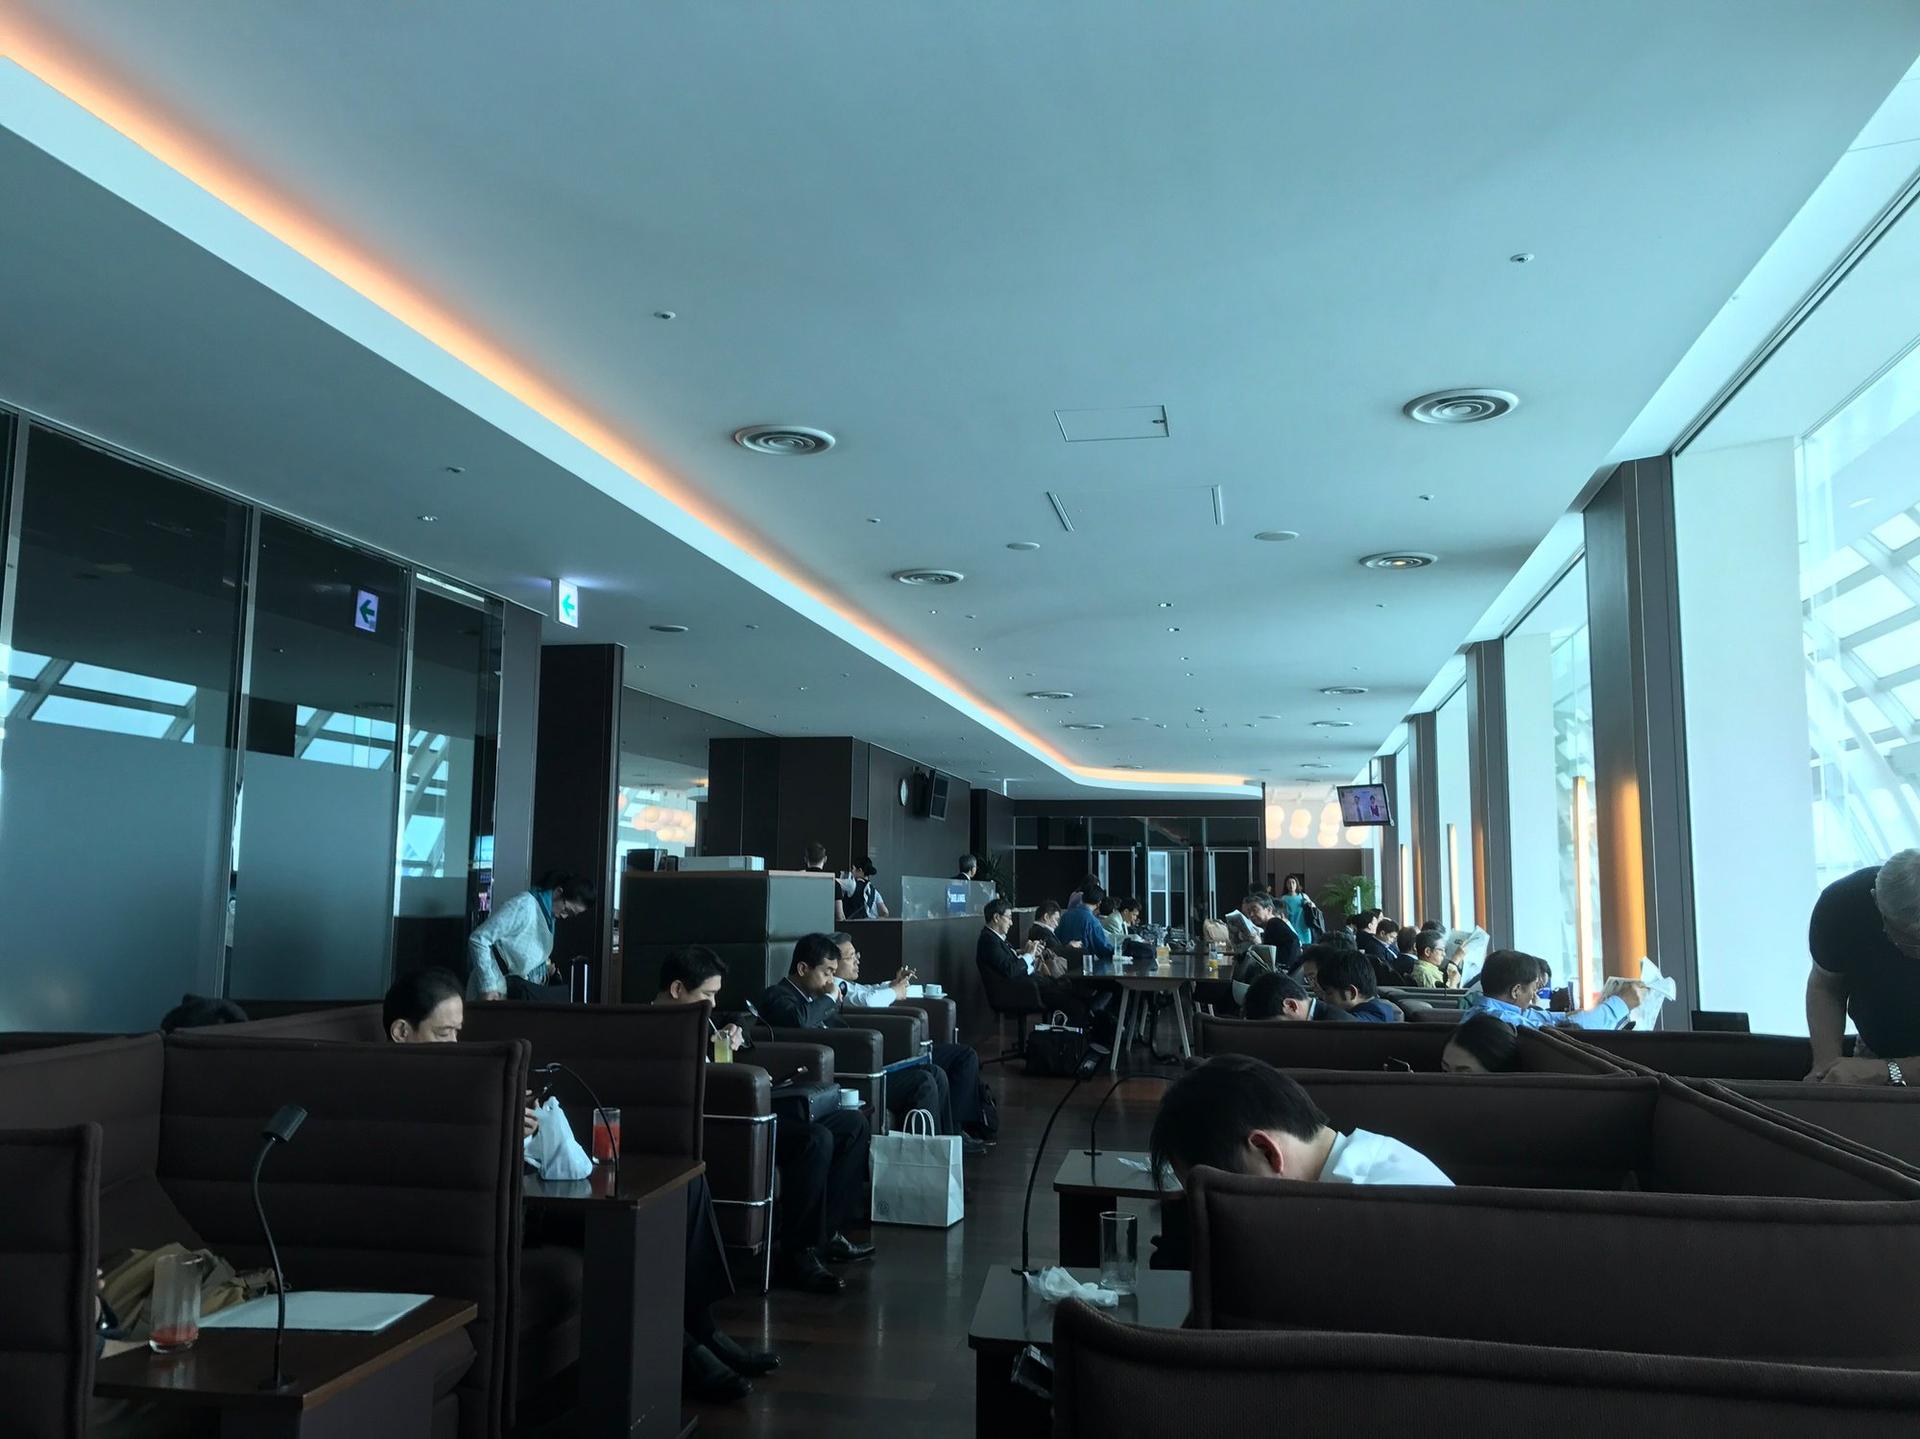 Airport Lounge (South) image 21 of 21